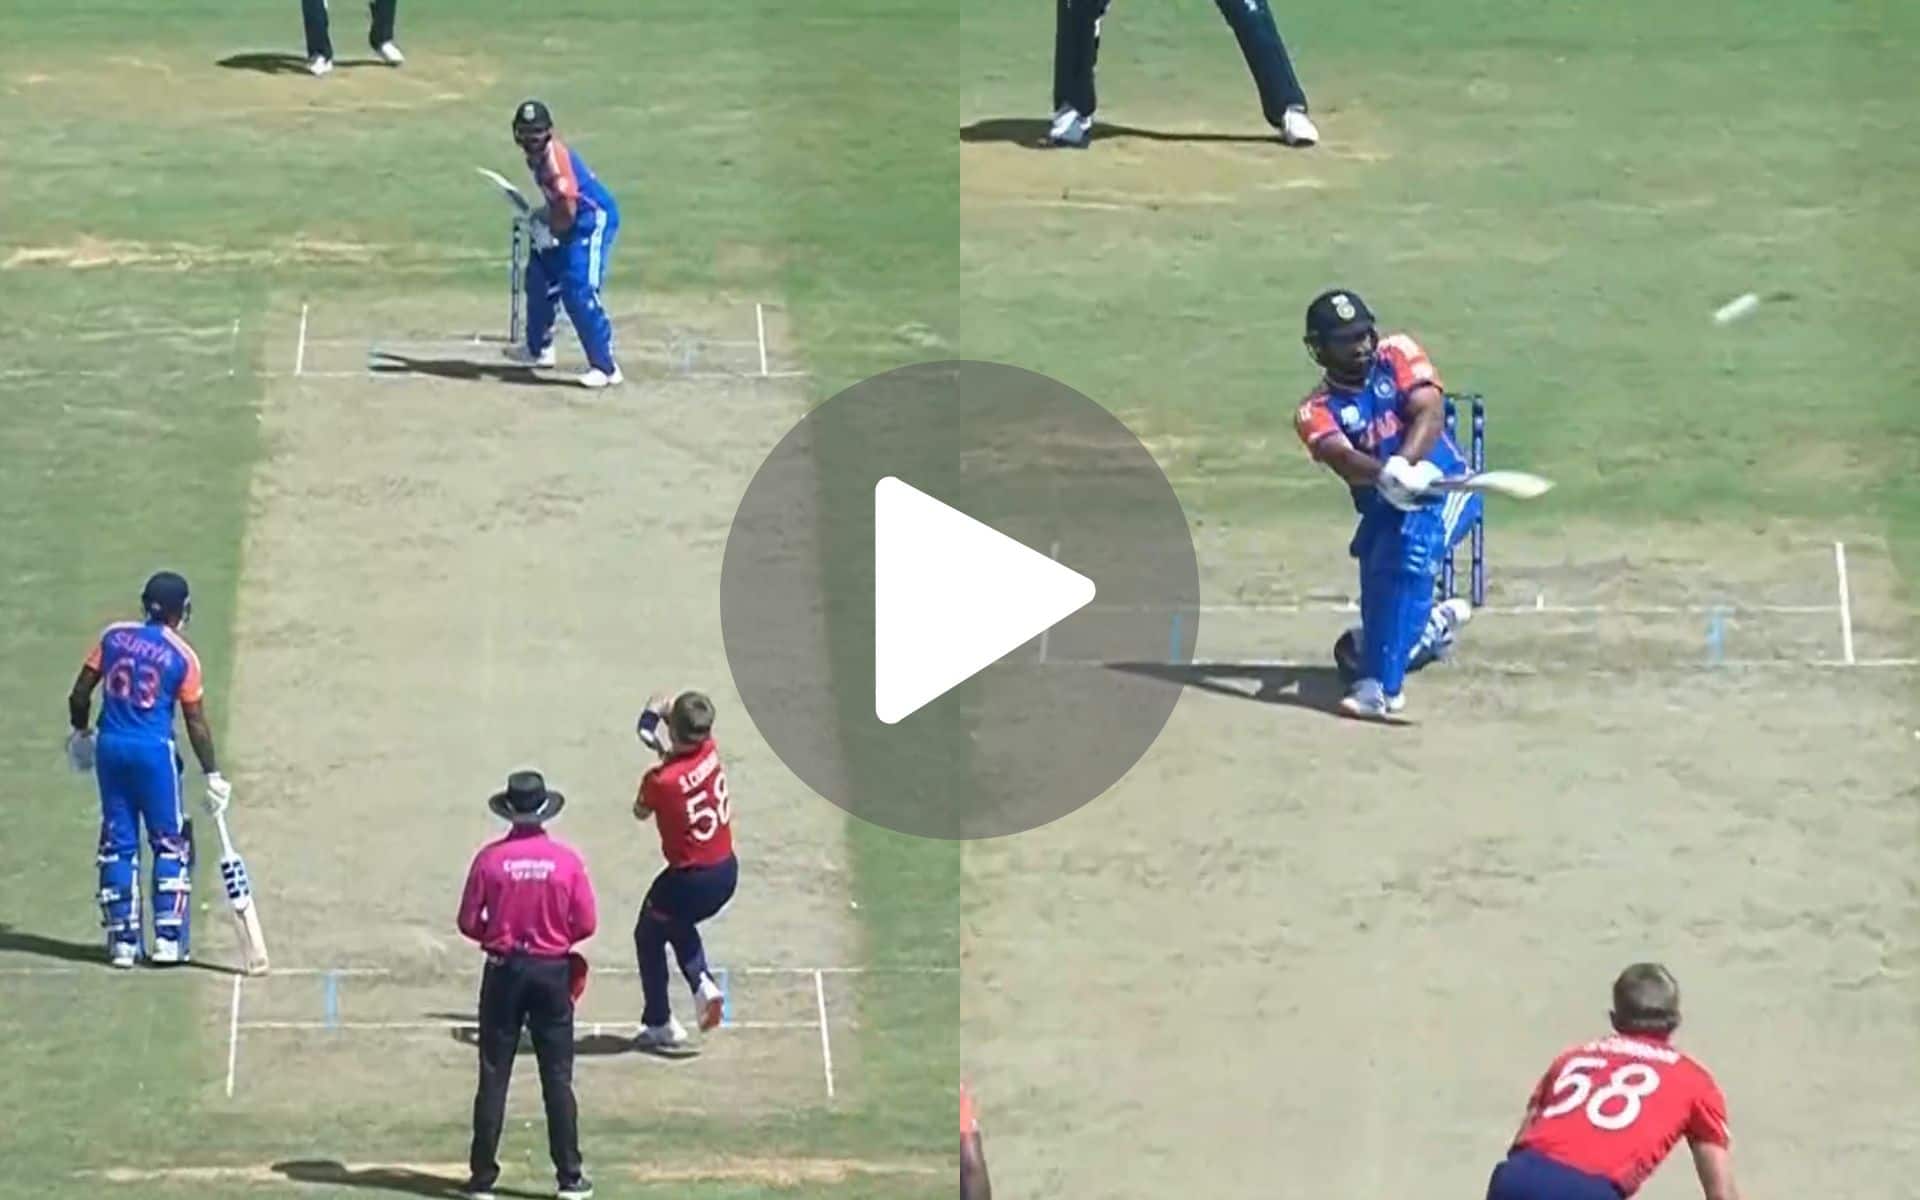 [Watch] Rohit Sharma 'Dispatches' Sam Curran Like A 'Mediocre Spinner' For A Stylish Sweep Six